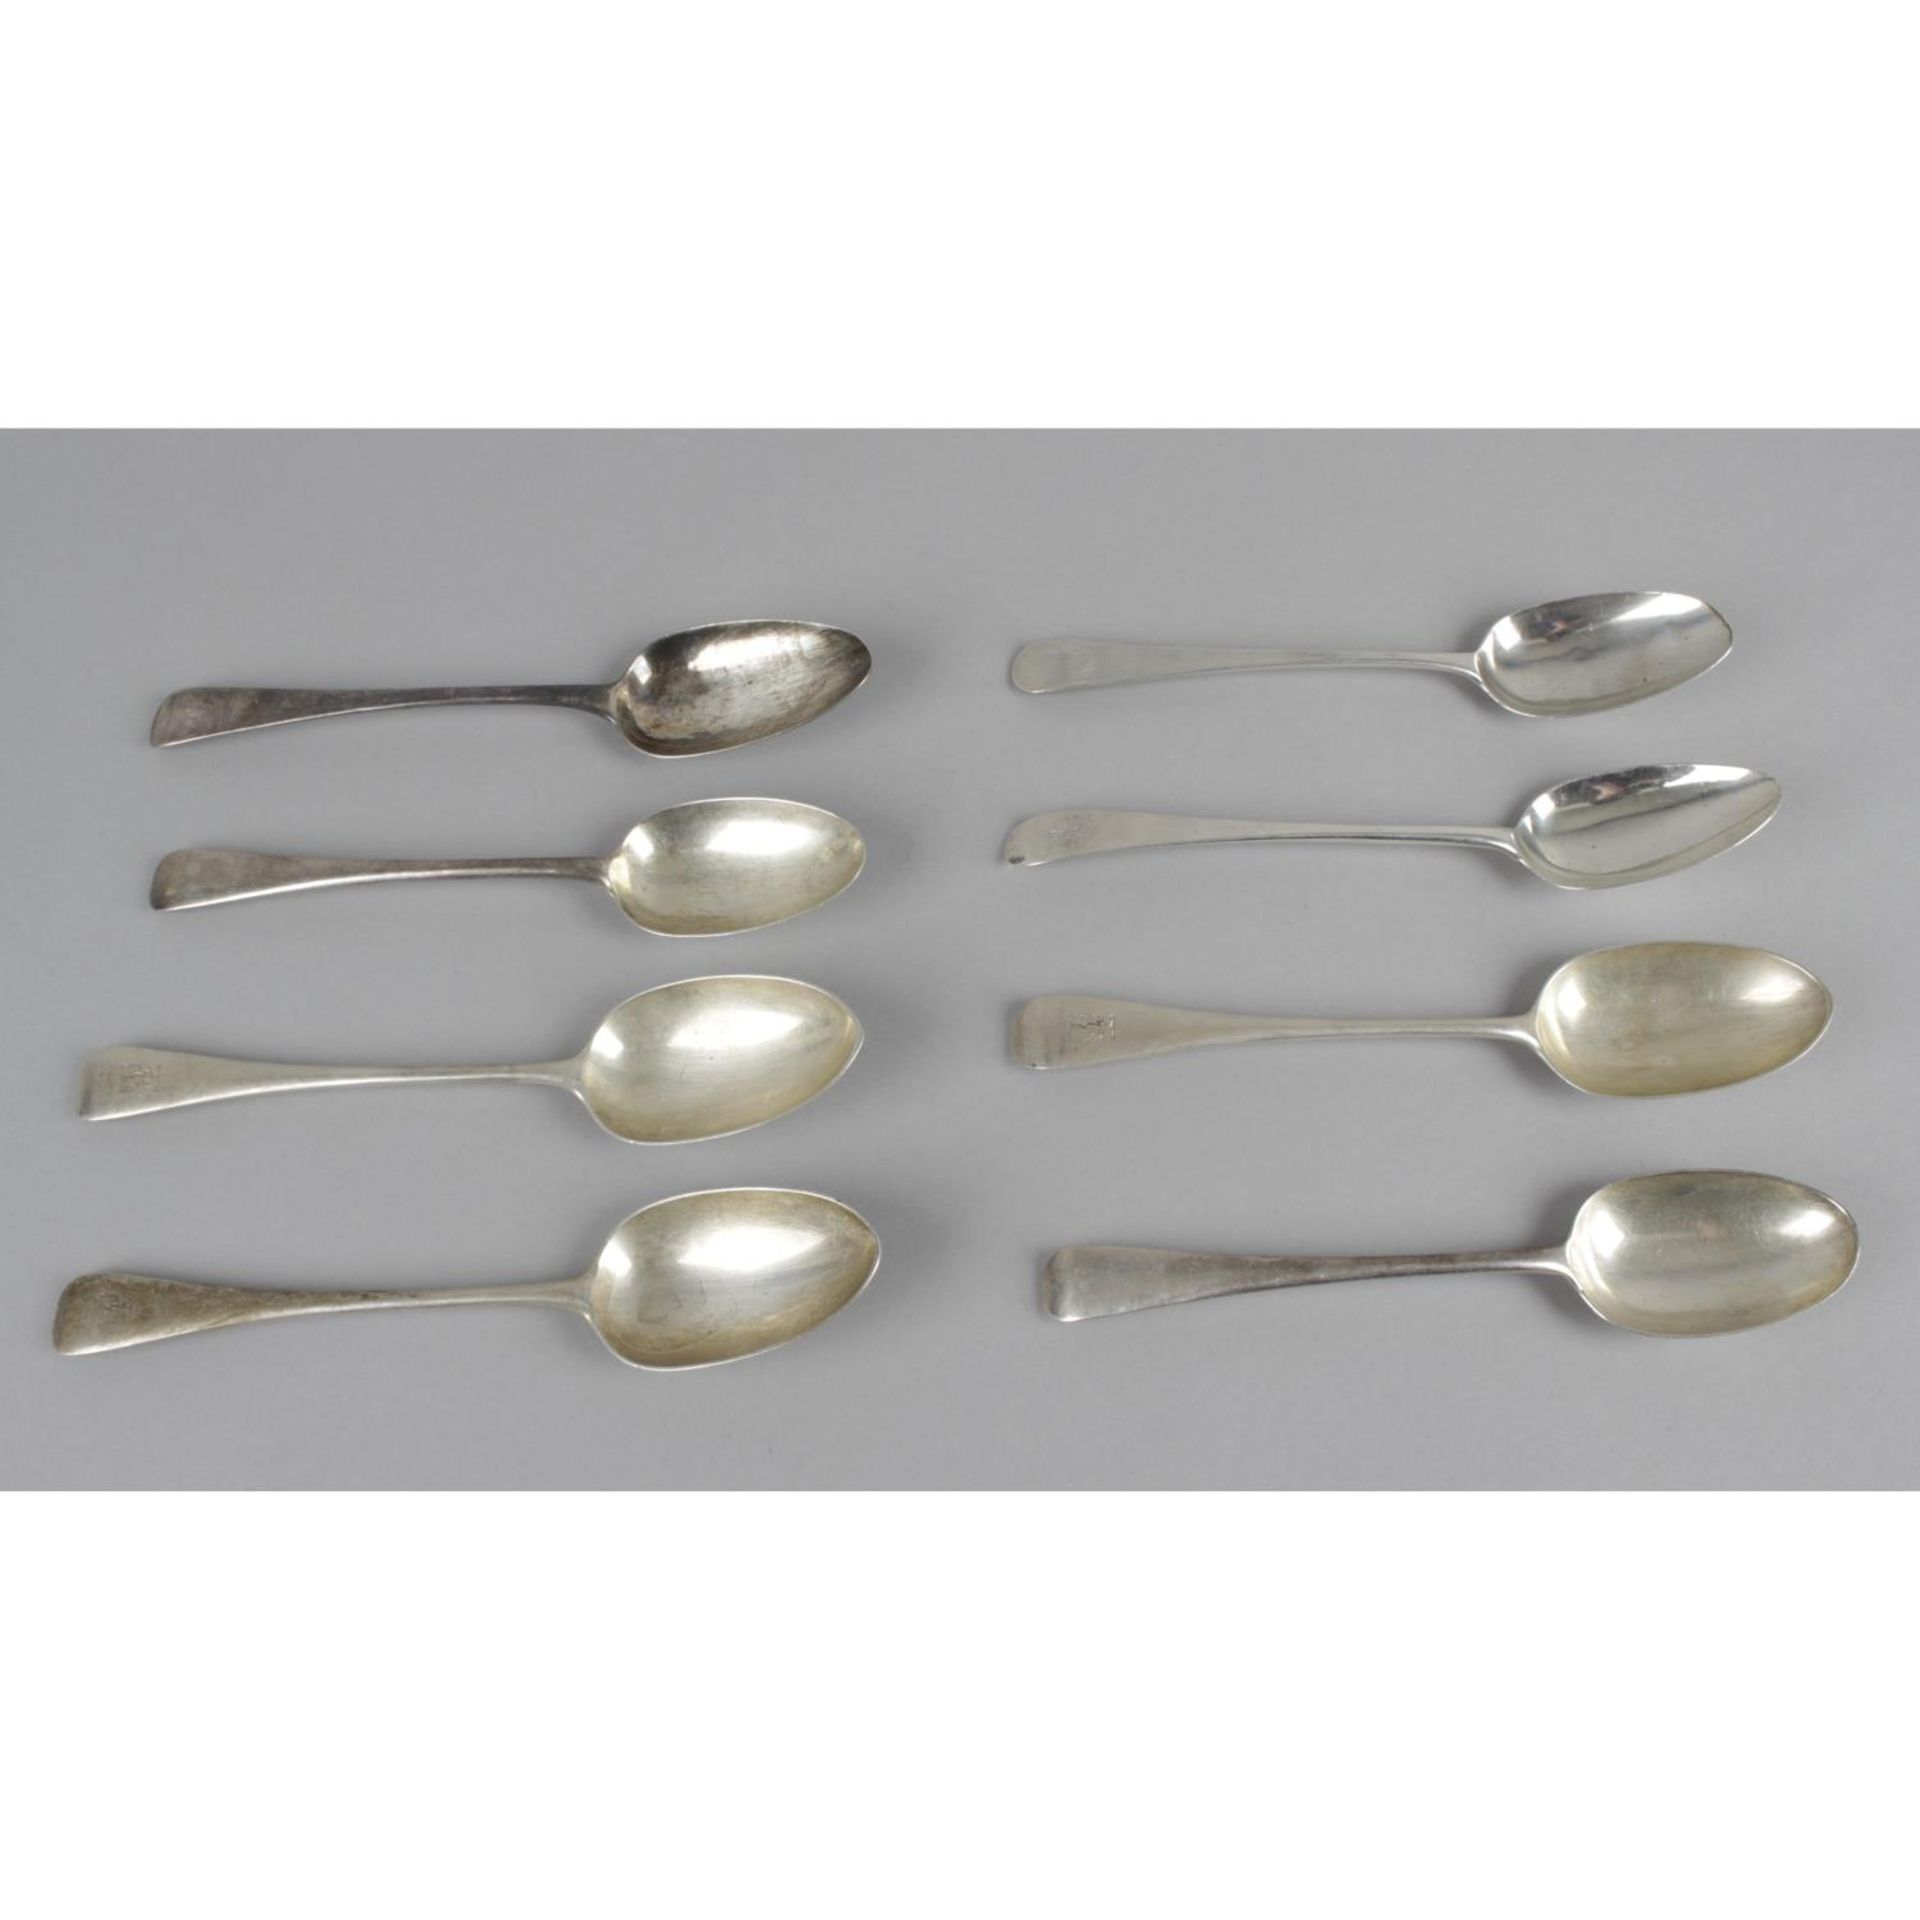 A selection of Old English pattern silver spoons, - Image 5 of 5